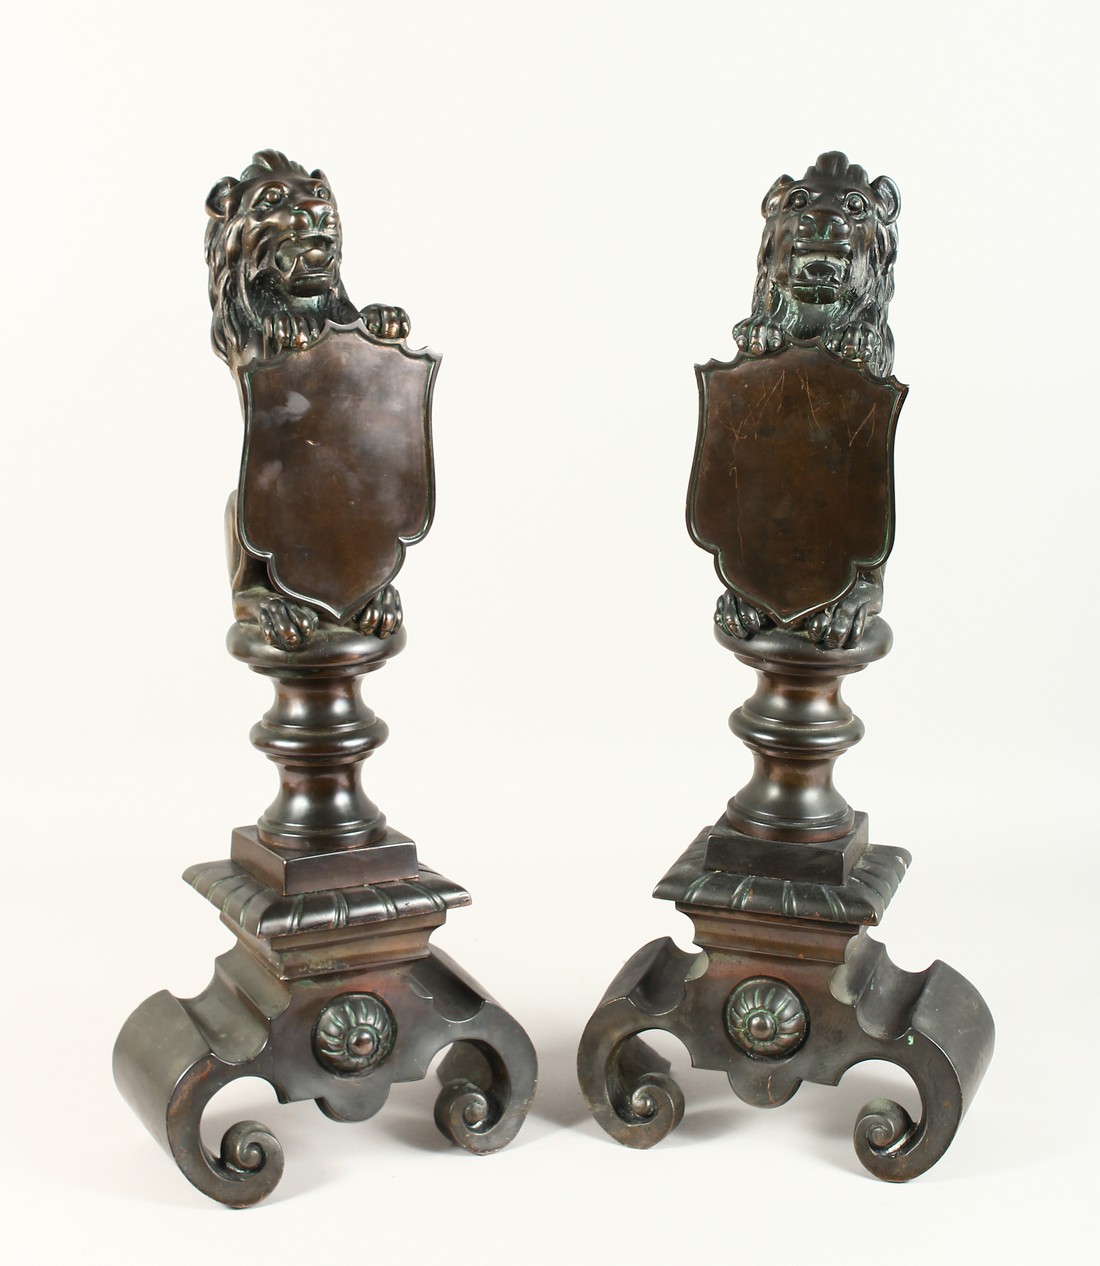 A SUPERB PAIR OF 19TH CENTURY BRONZE LION CHENETS holding a shield 23ins high.